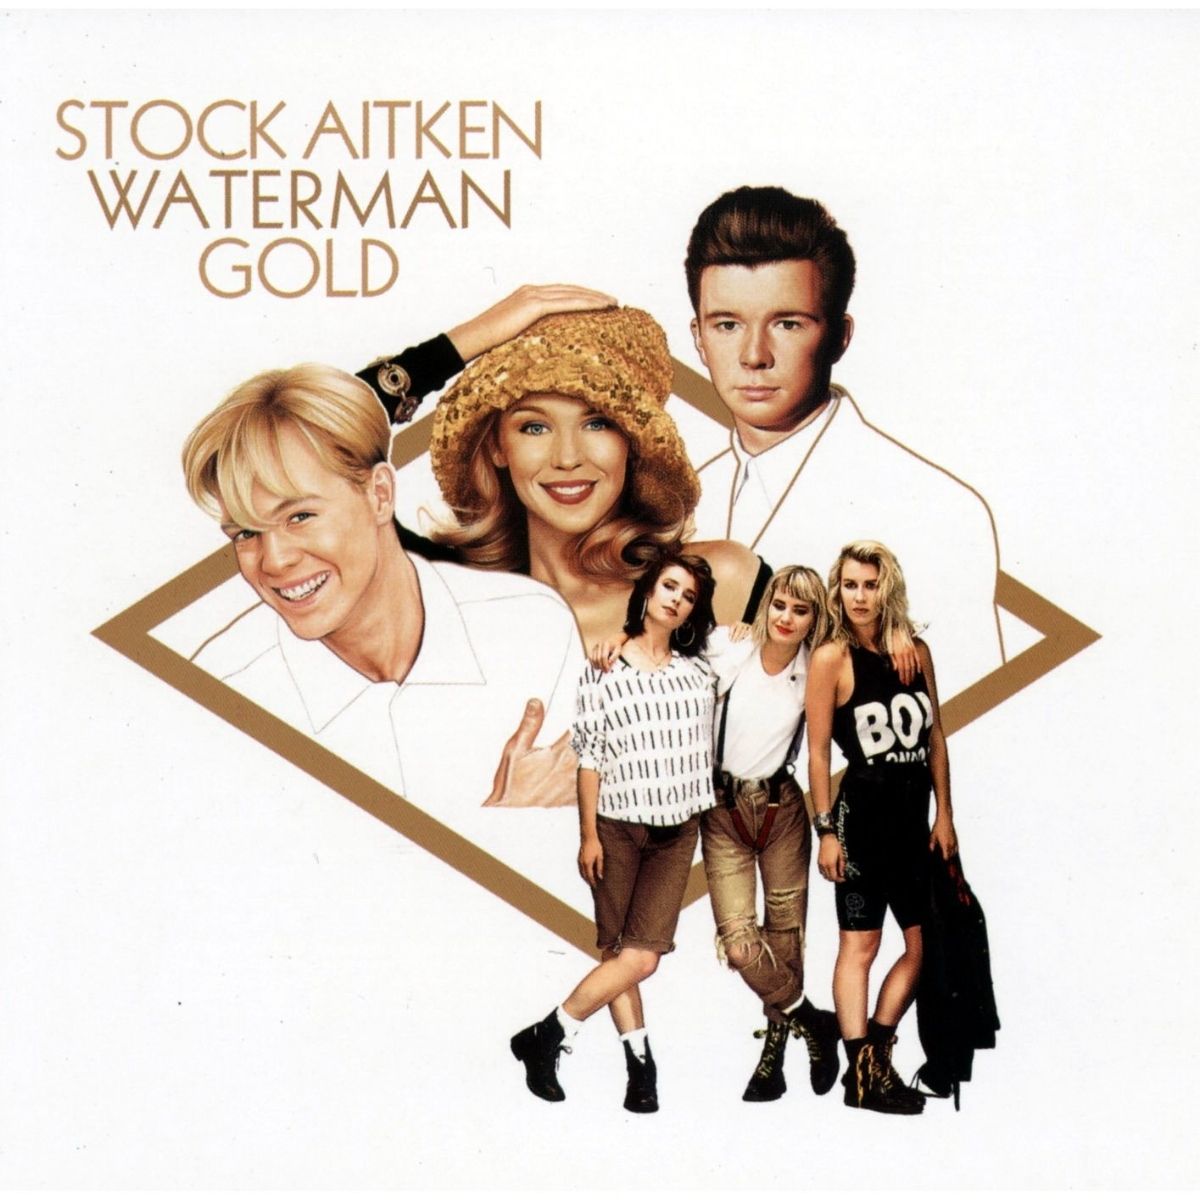 Record "Stock, Aitken, Waterman Gold" with the best hits of the producers